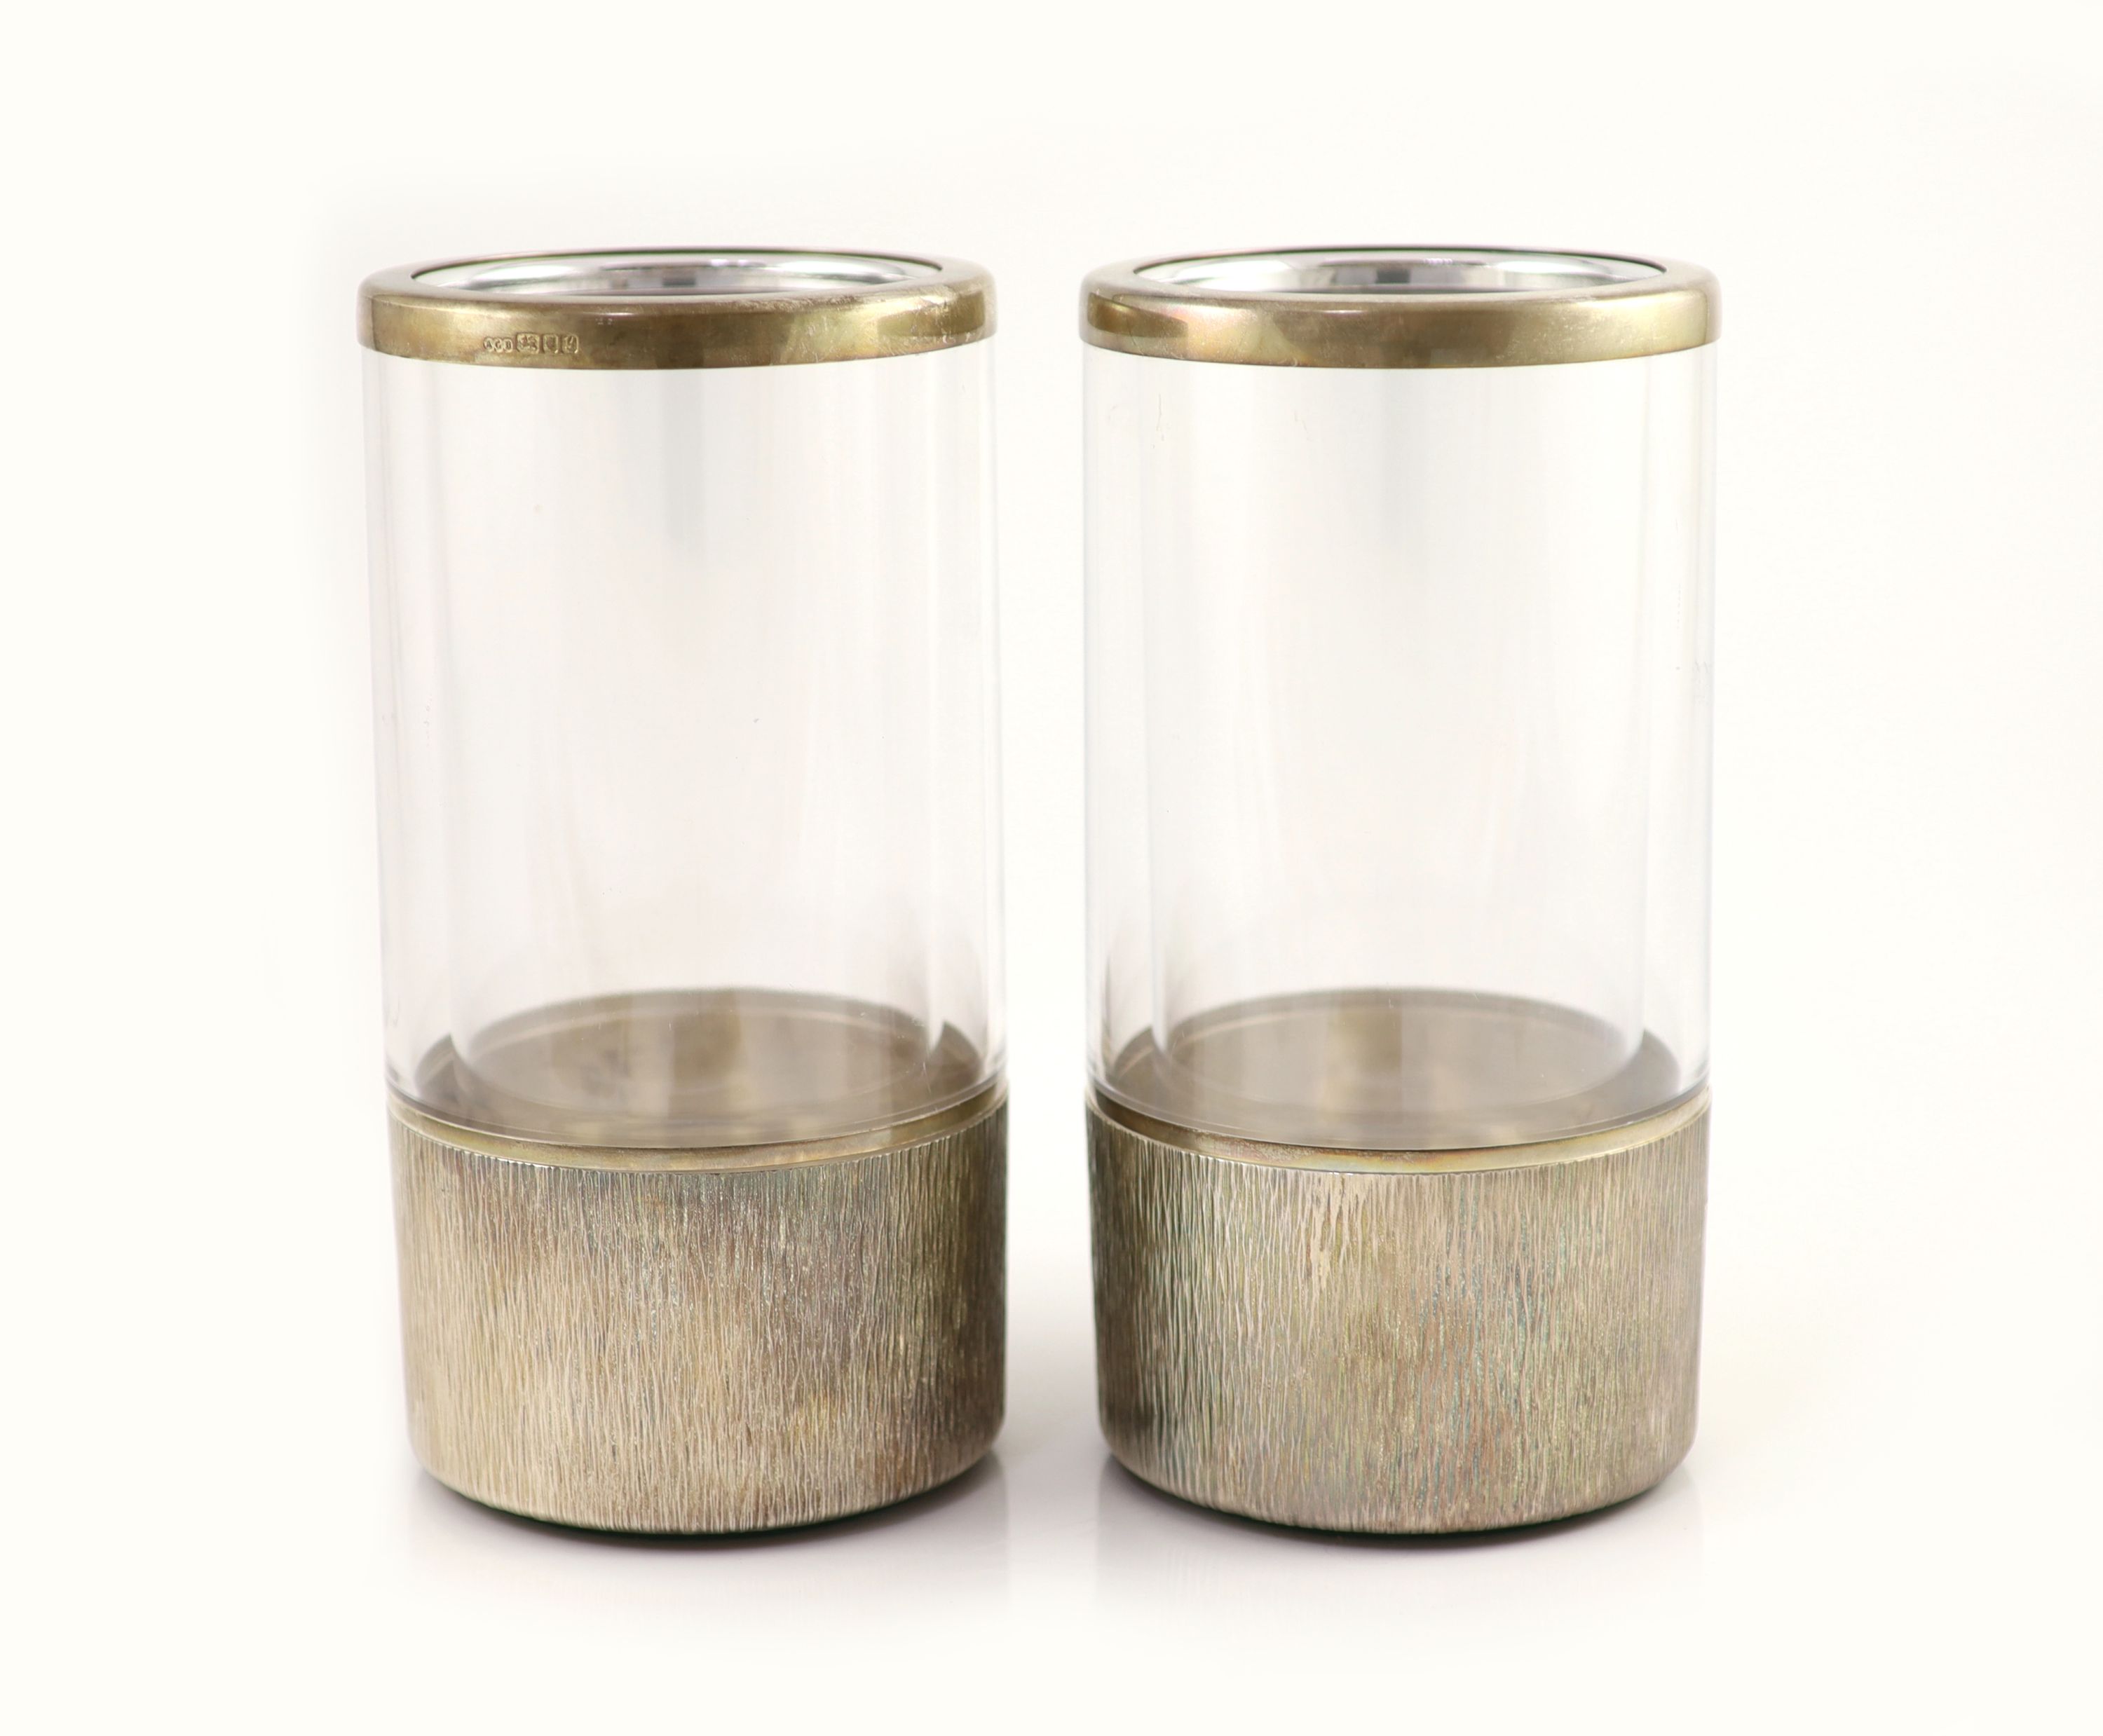 A pair of textured silver bottle coasters by Adrian Gerald Benney, with removeable silver mounted plastic liners